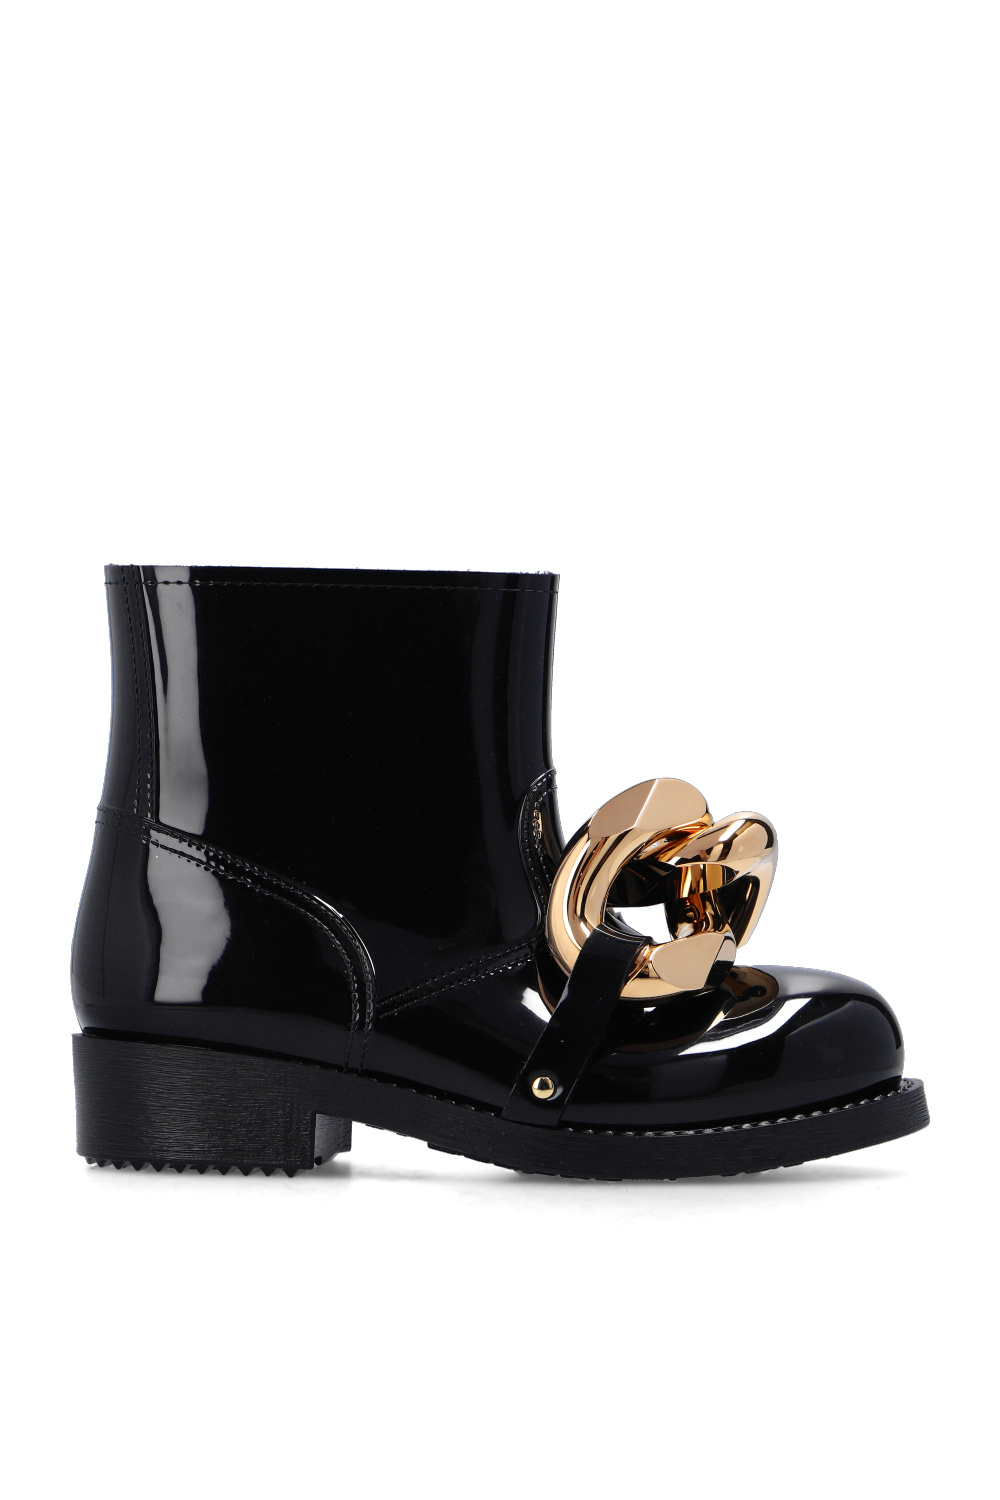 JW Anderson Short rubber boots